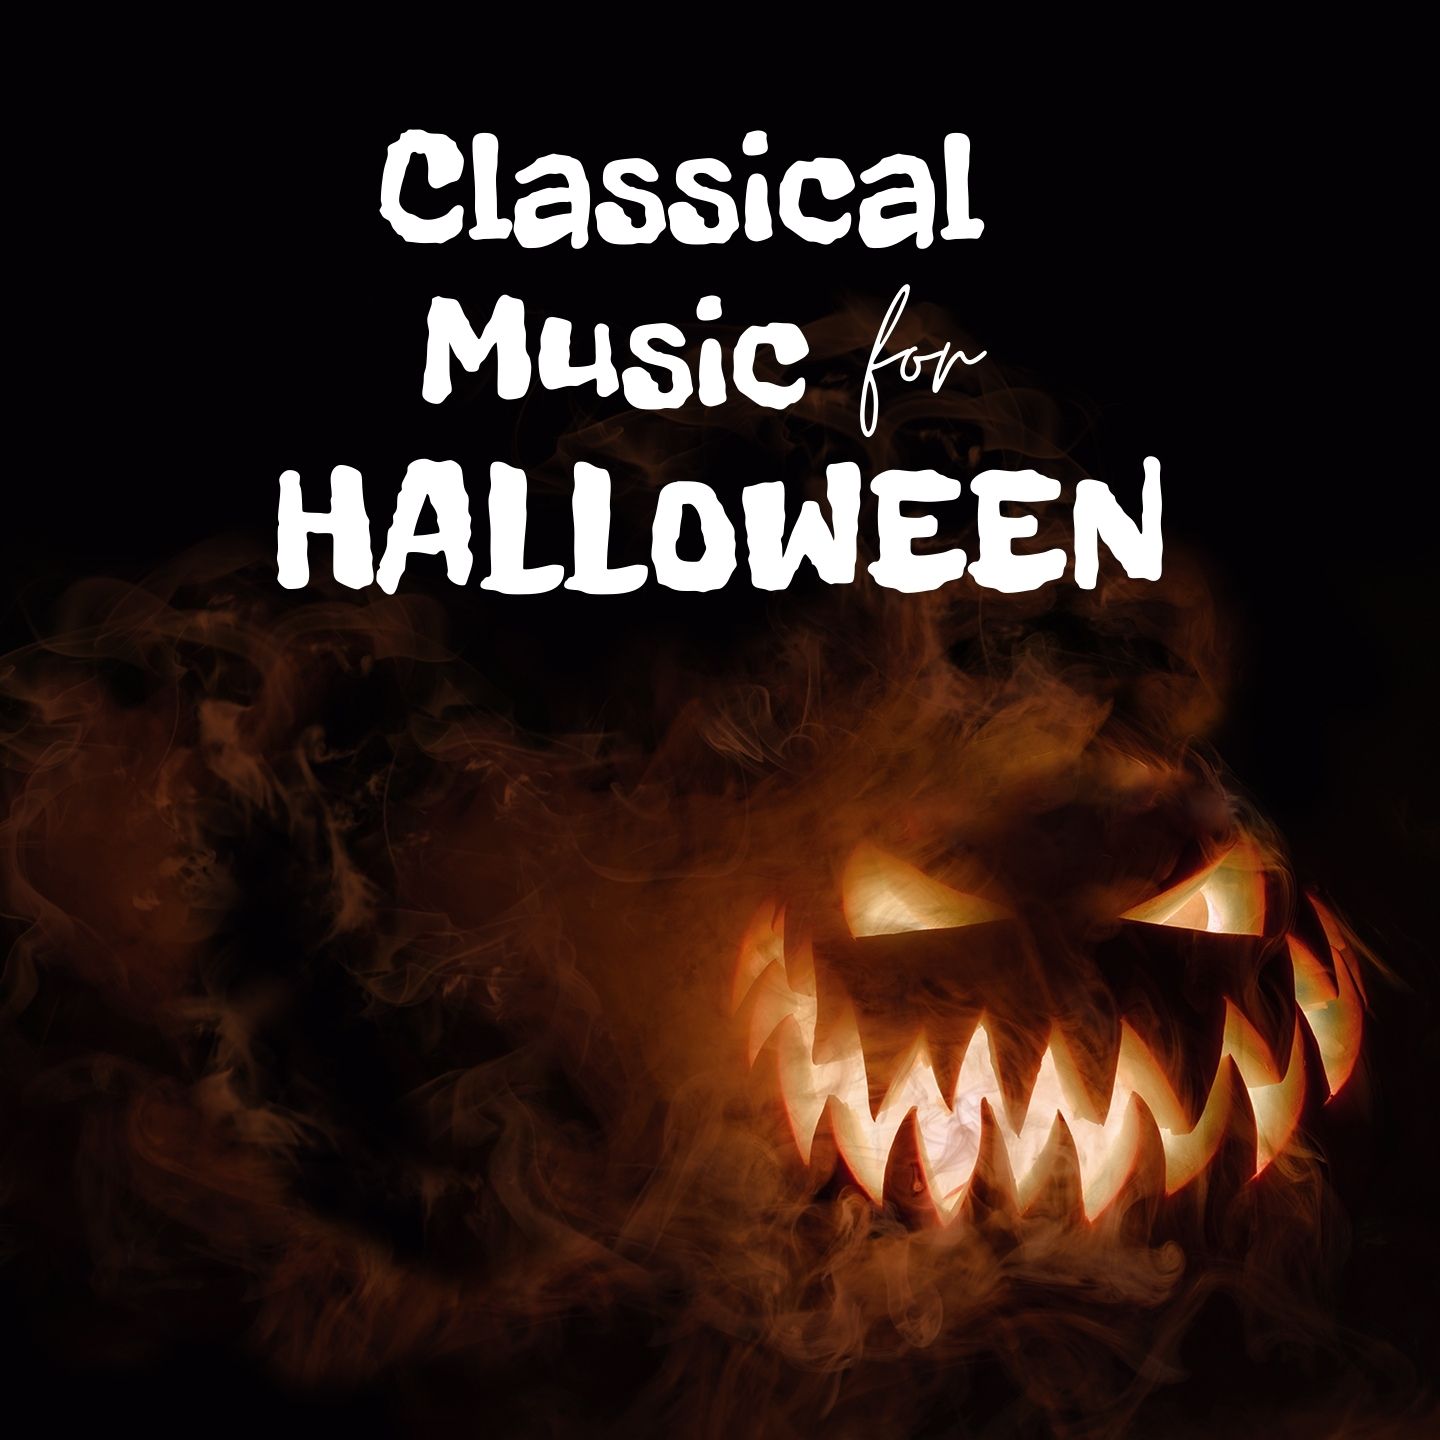 Classical Music for Halloween - Spooky Classical Music